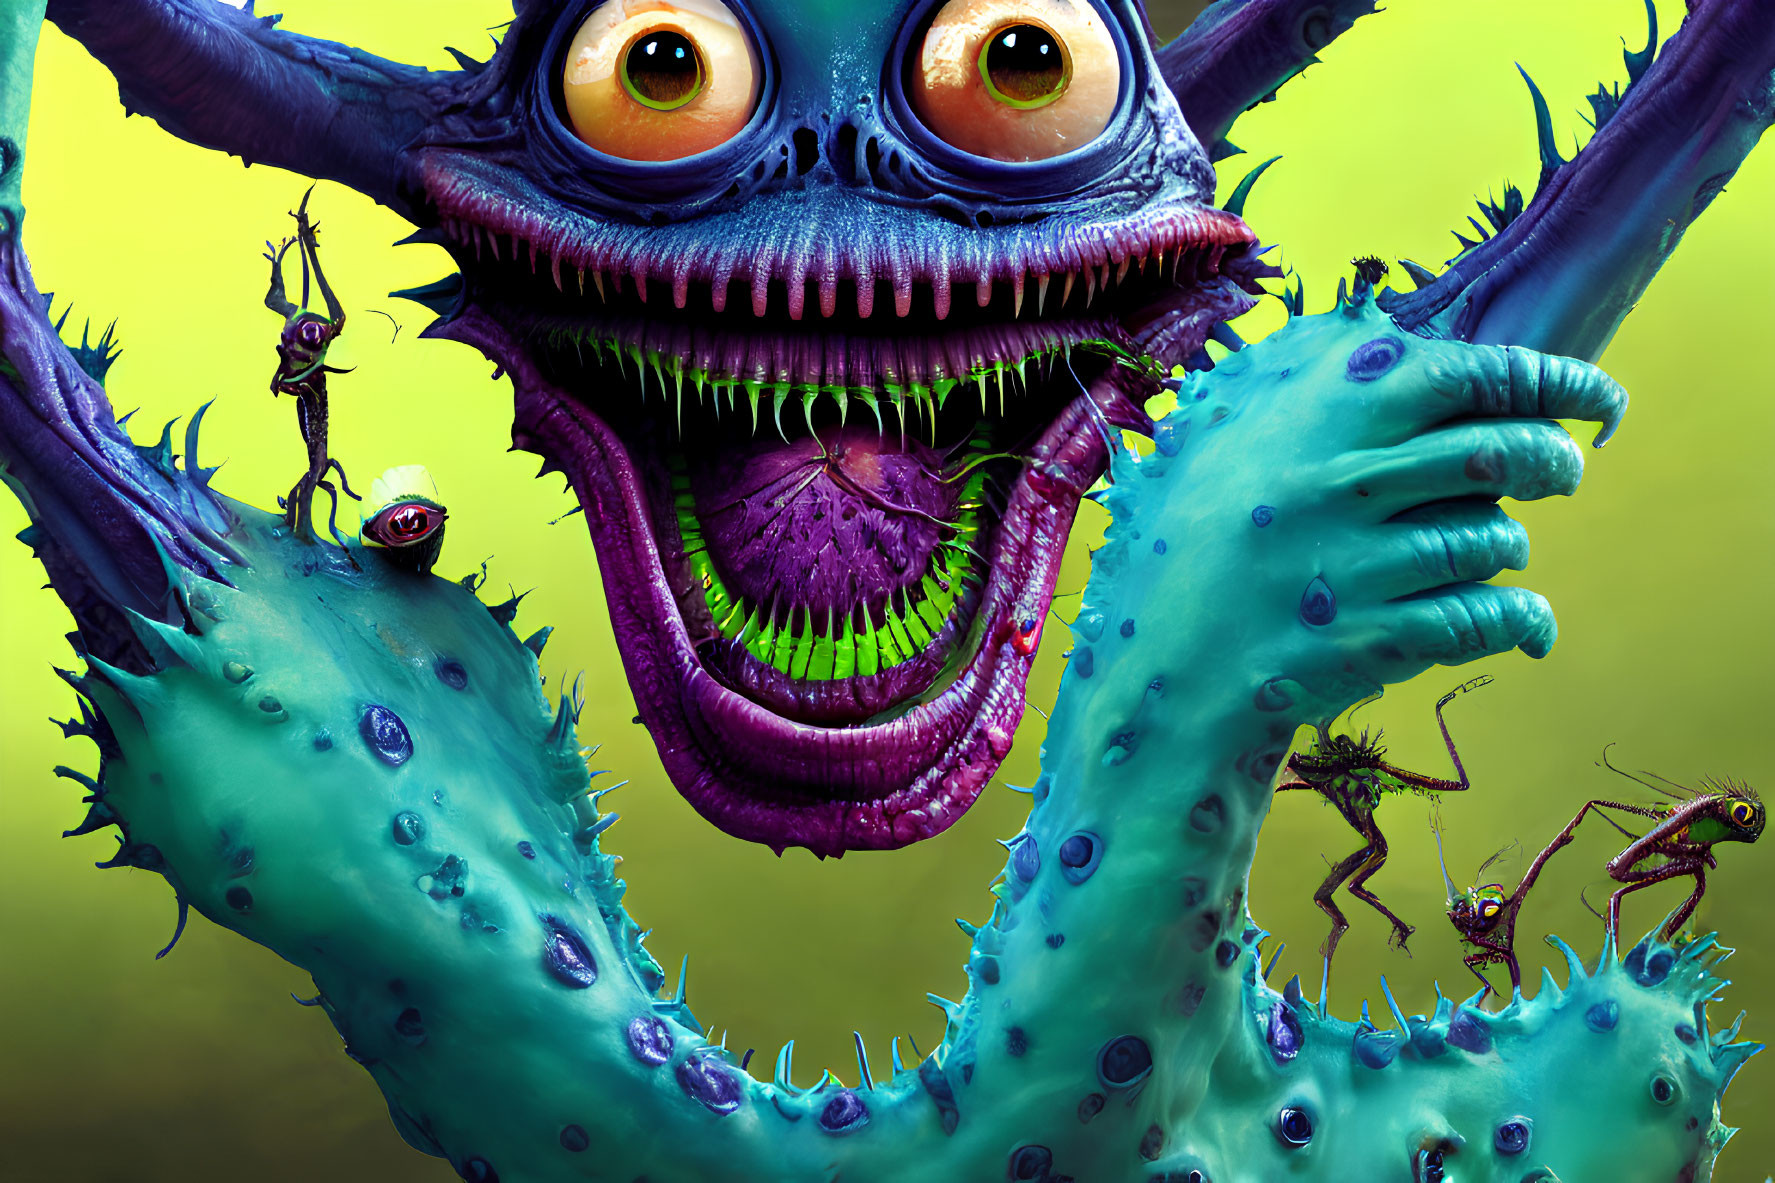 Colorful animated monster with multiple eyes, tentacles, and tiny creatures on green background